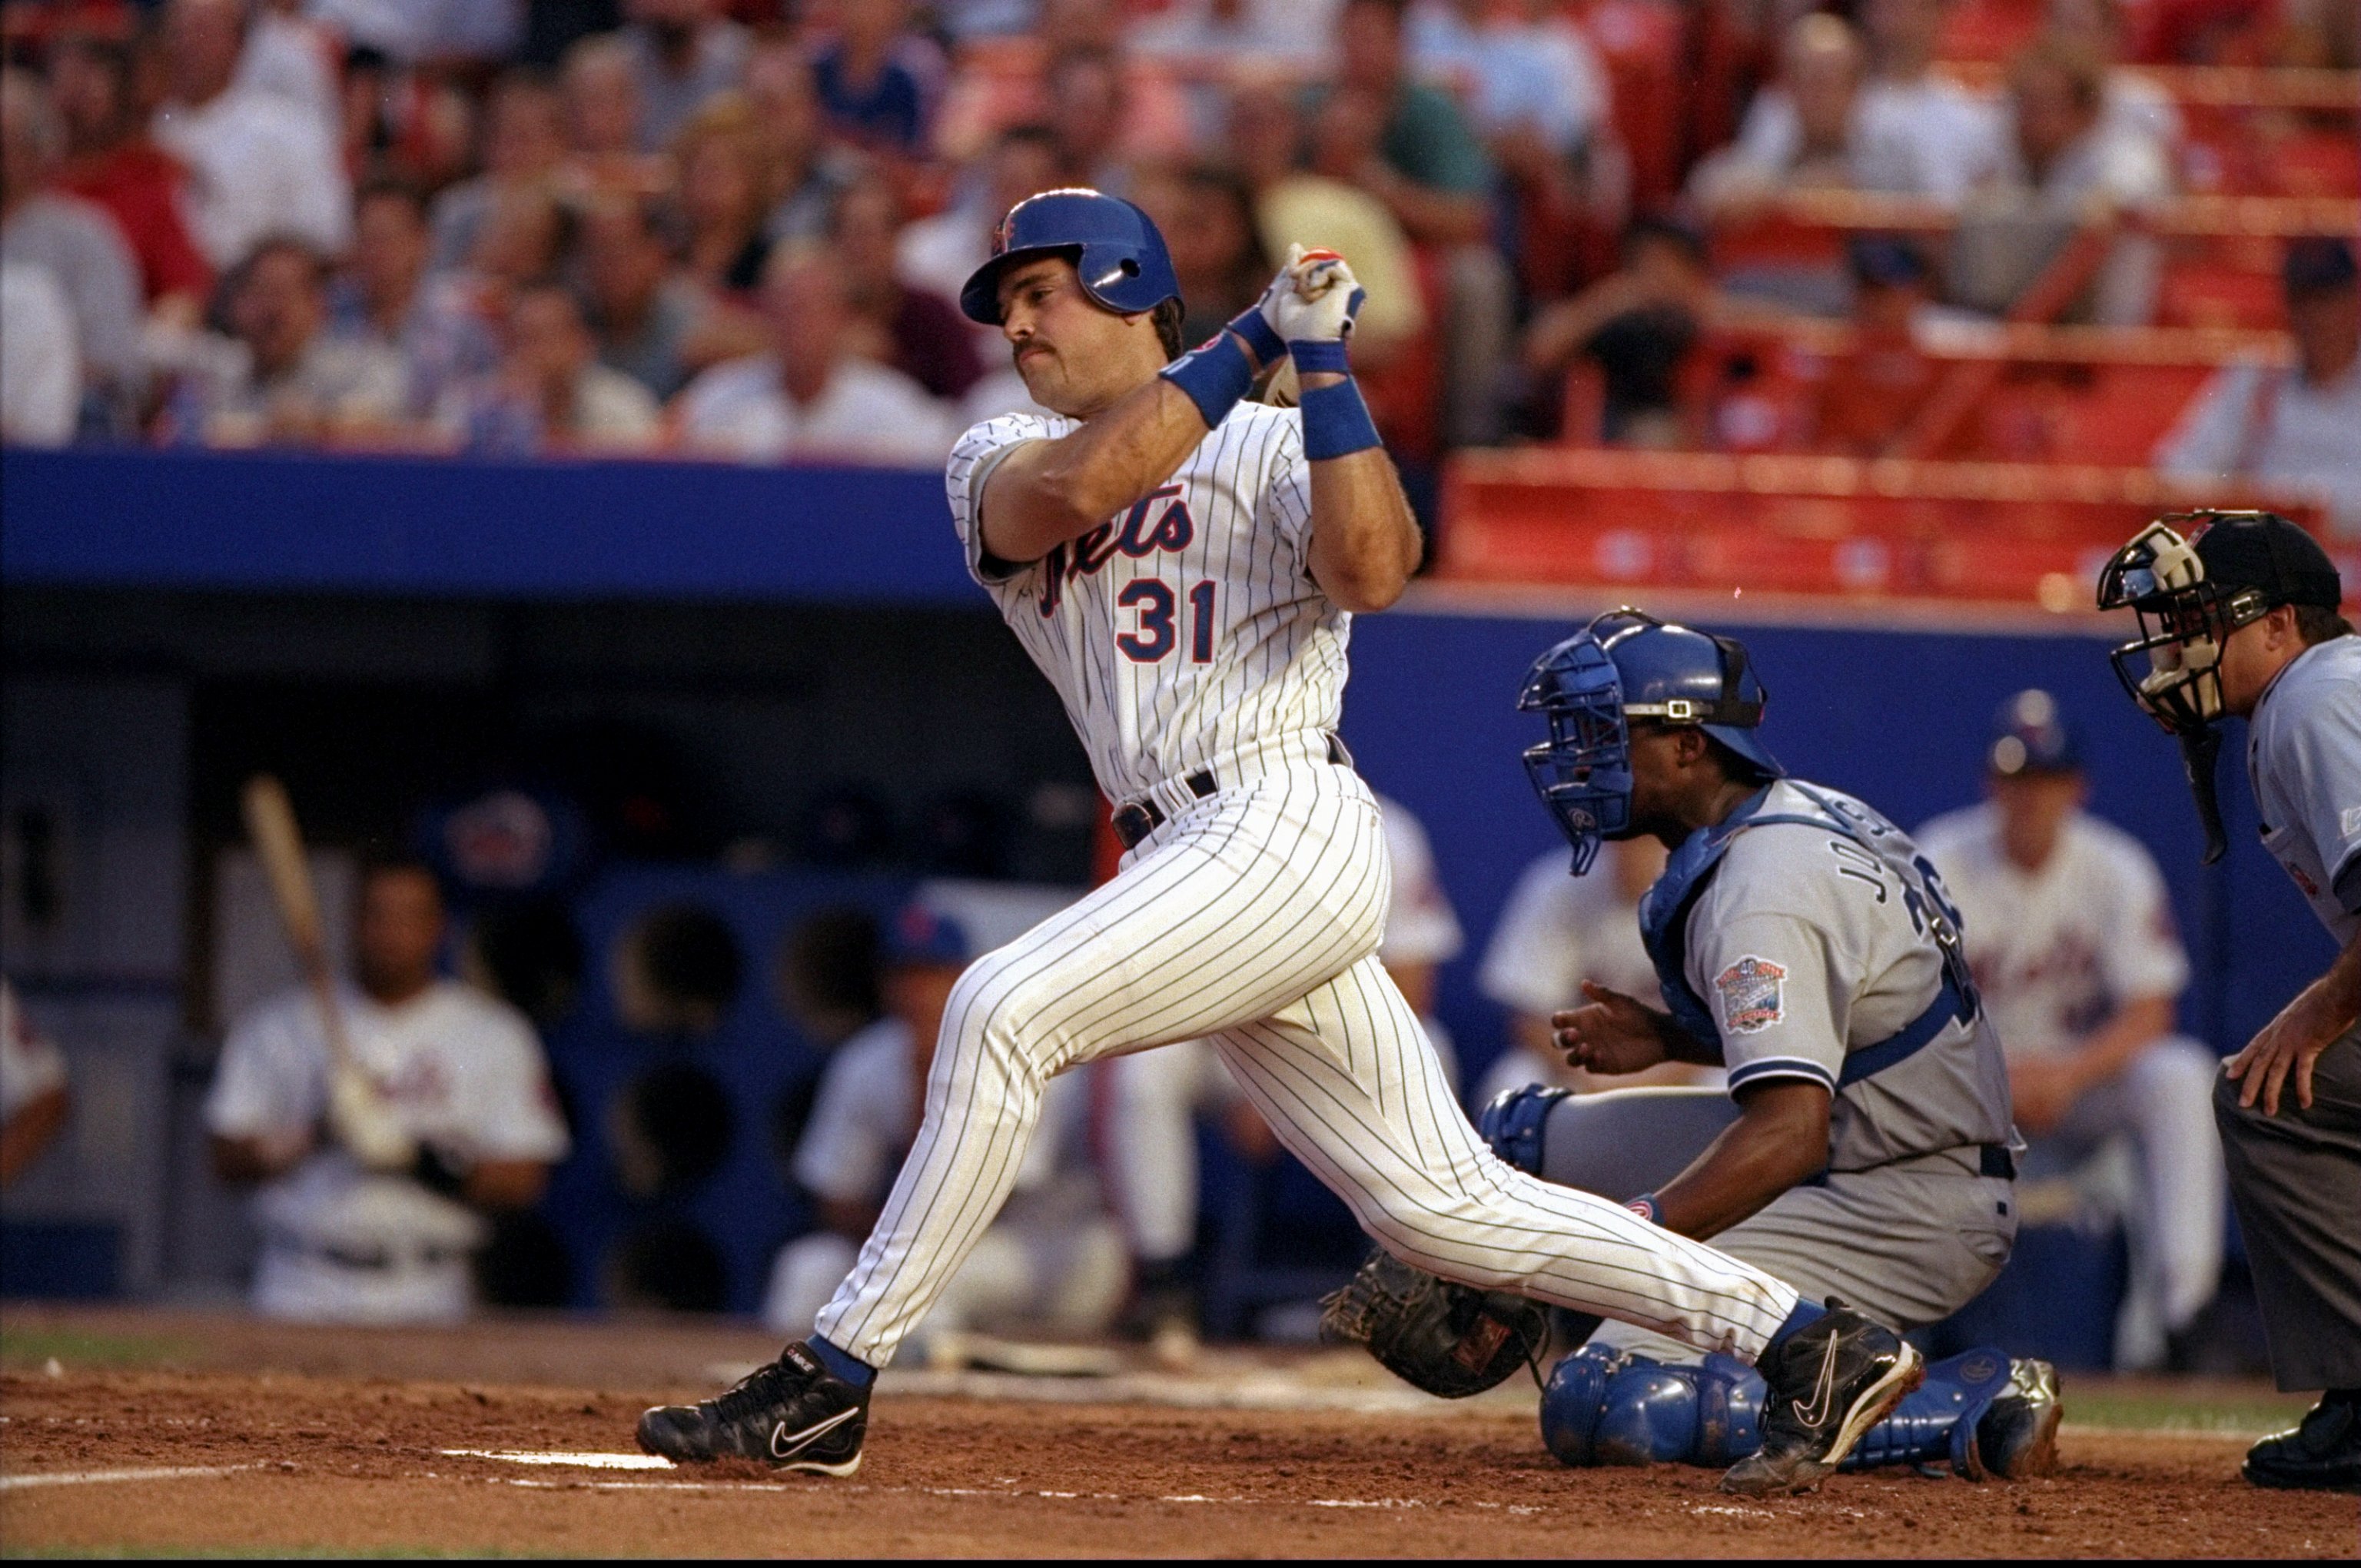 Mike Piazza's post-9/11 Mets jersey is suddenly a very hot issue